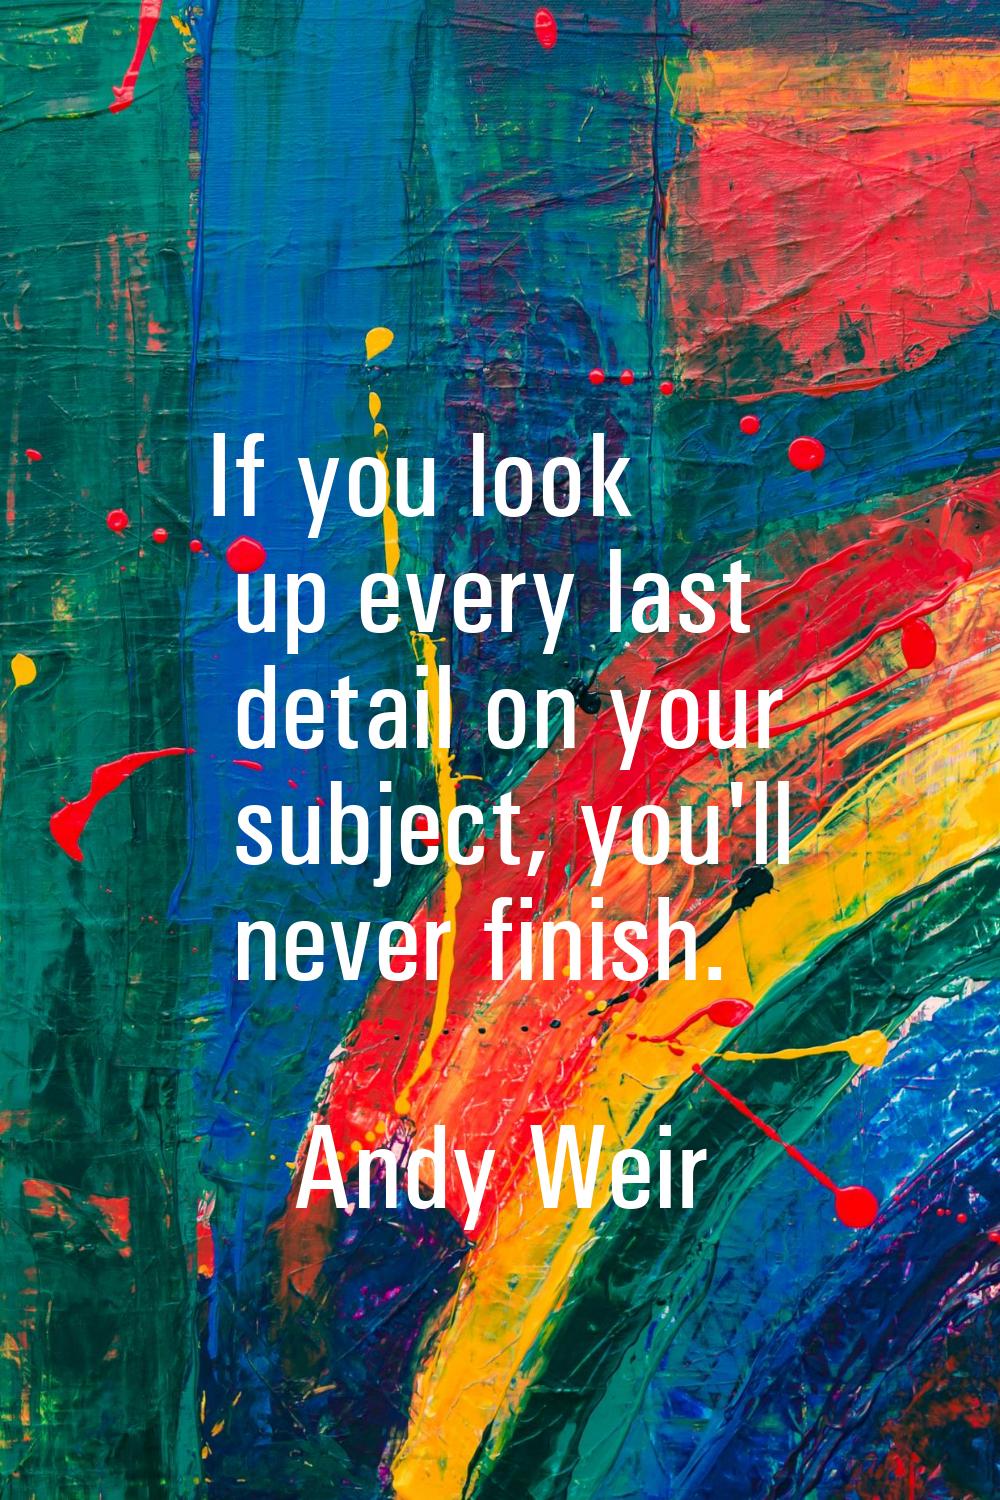 If you look up every last detail on your subject, you'll never finish.